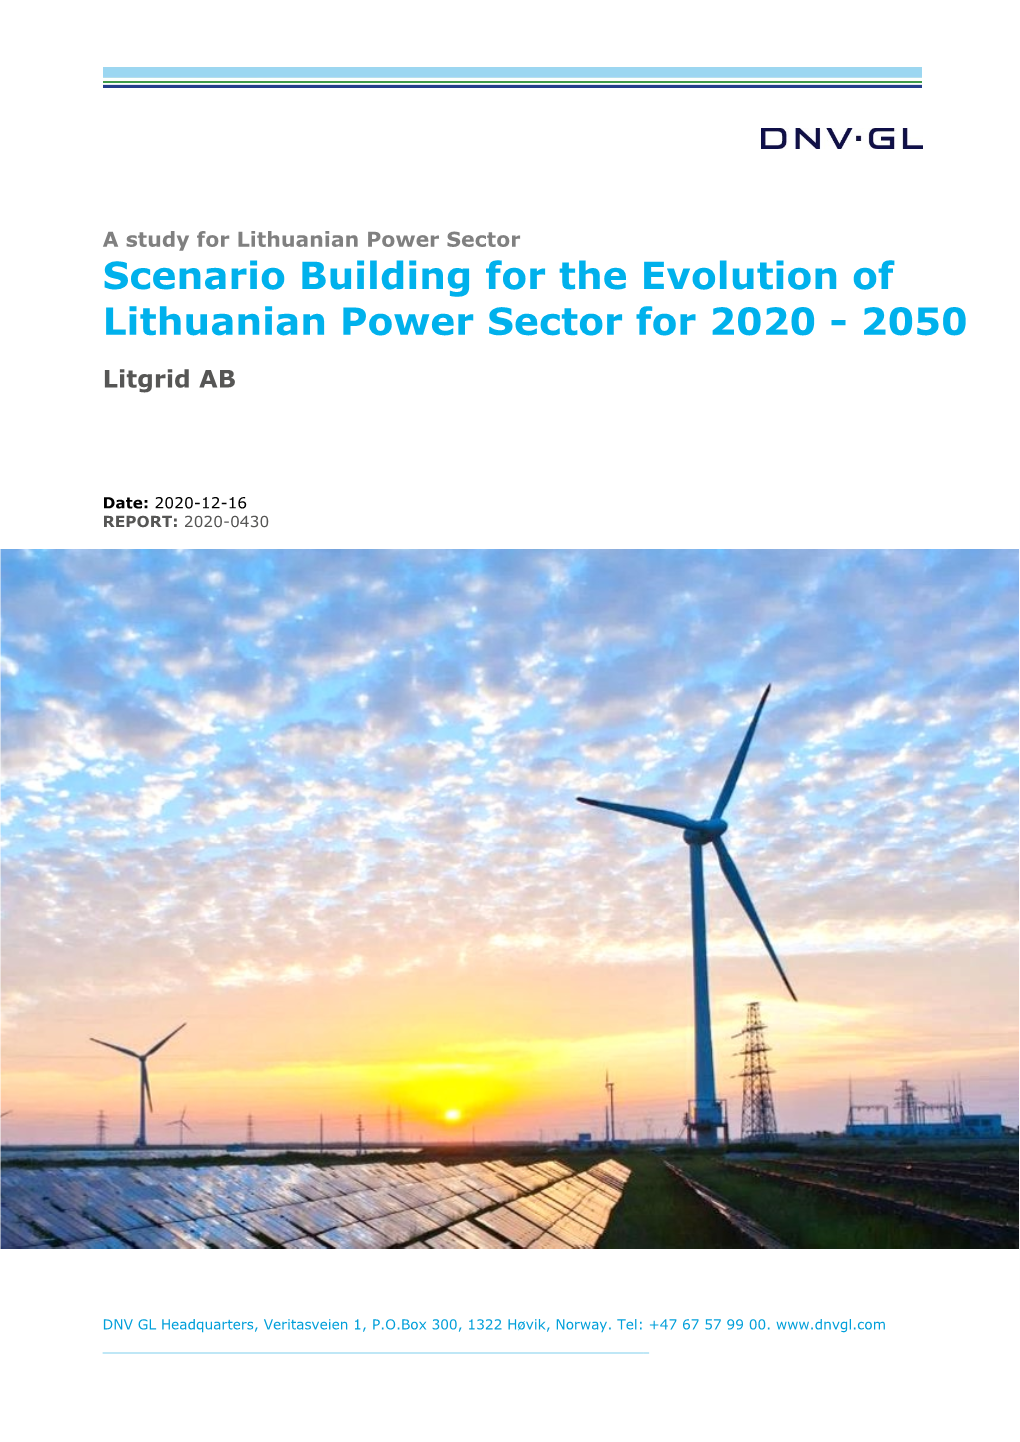 Scenario Building for the Evolution of Lithuanian Power Sector for 2020 - 2050 Litgrid AB